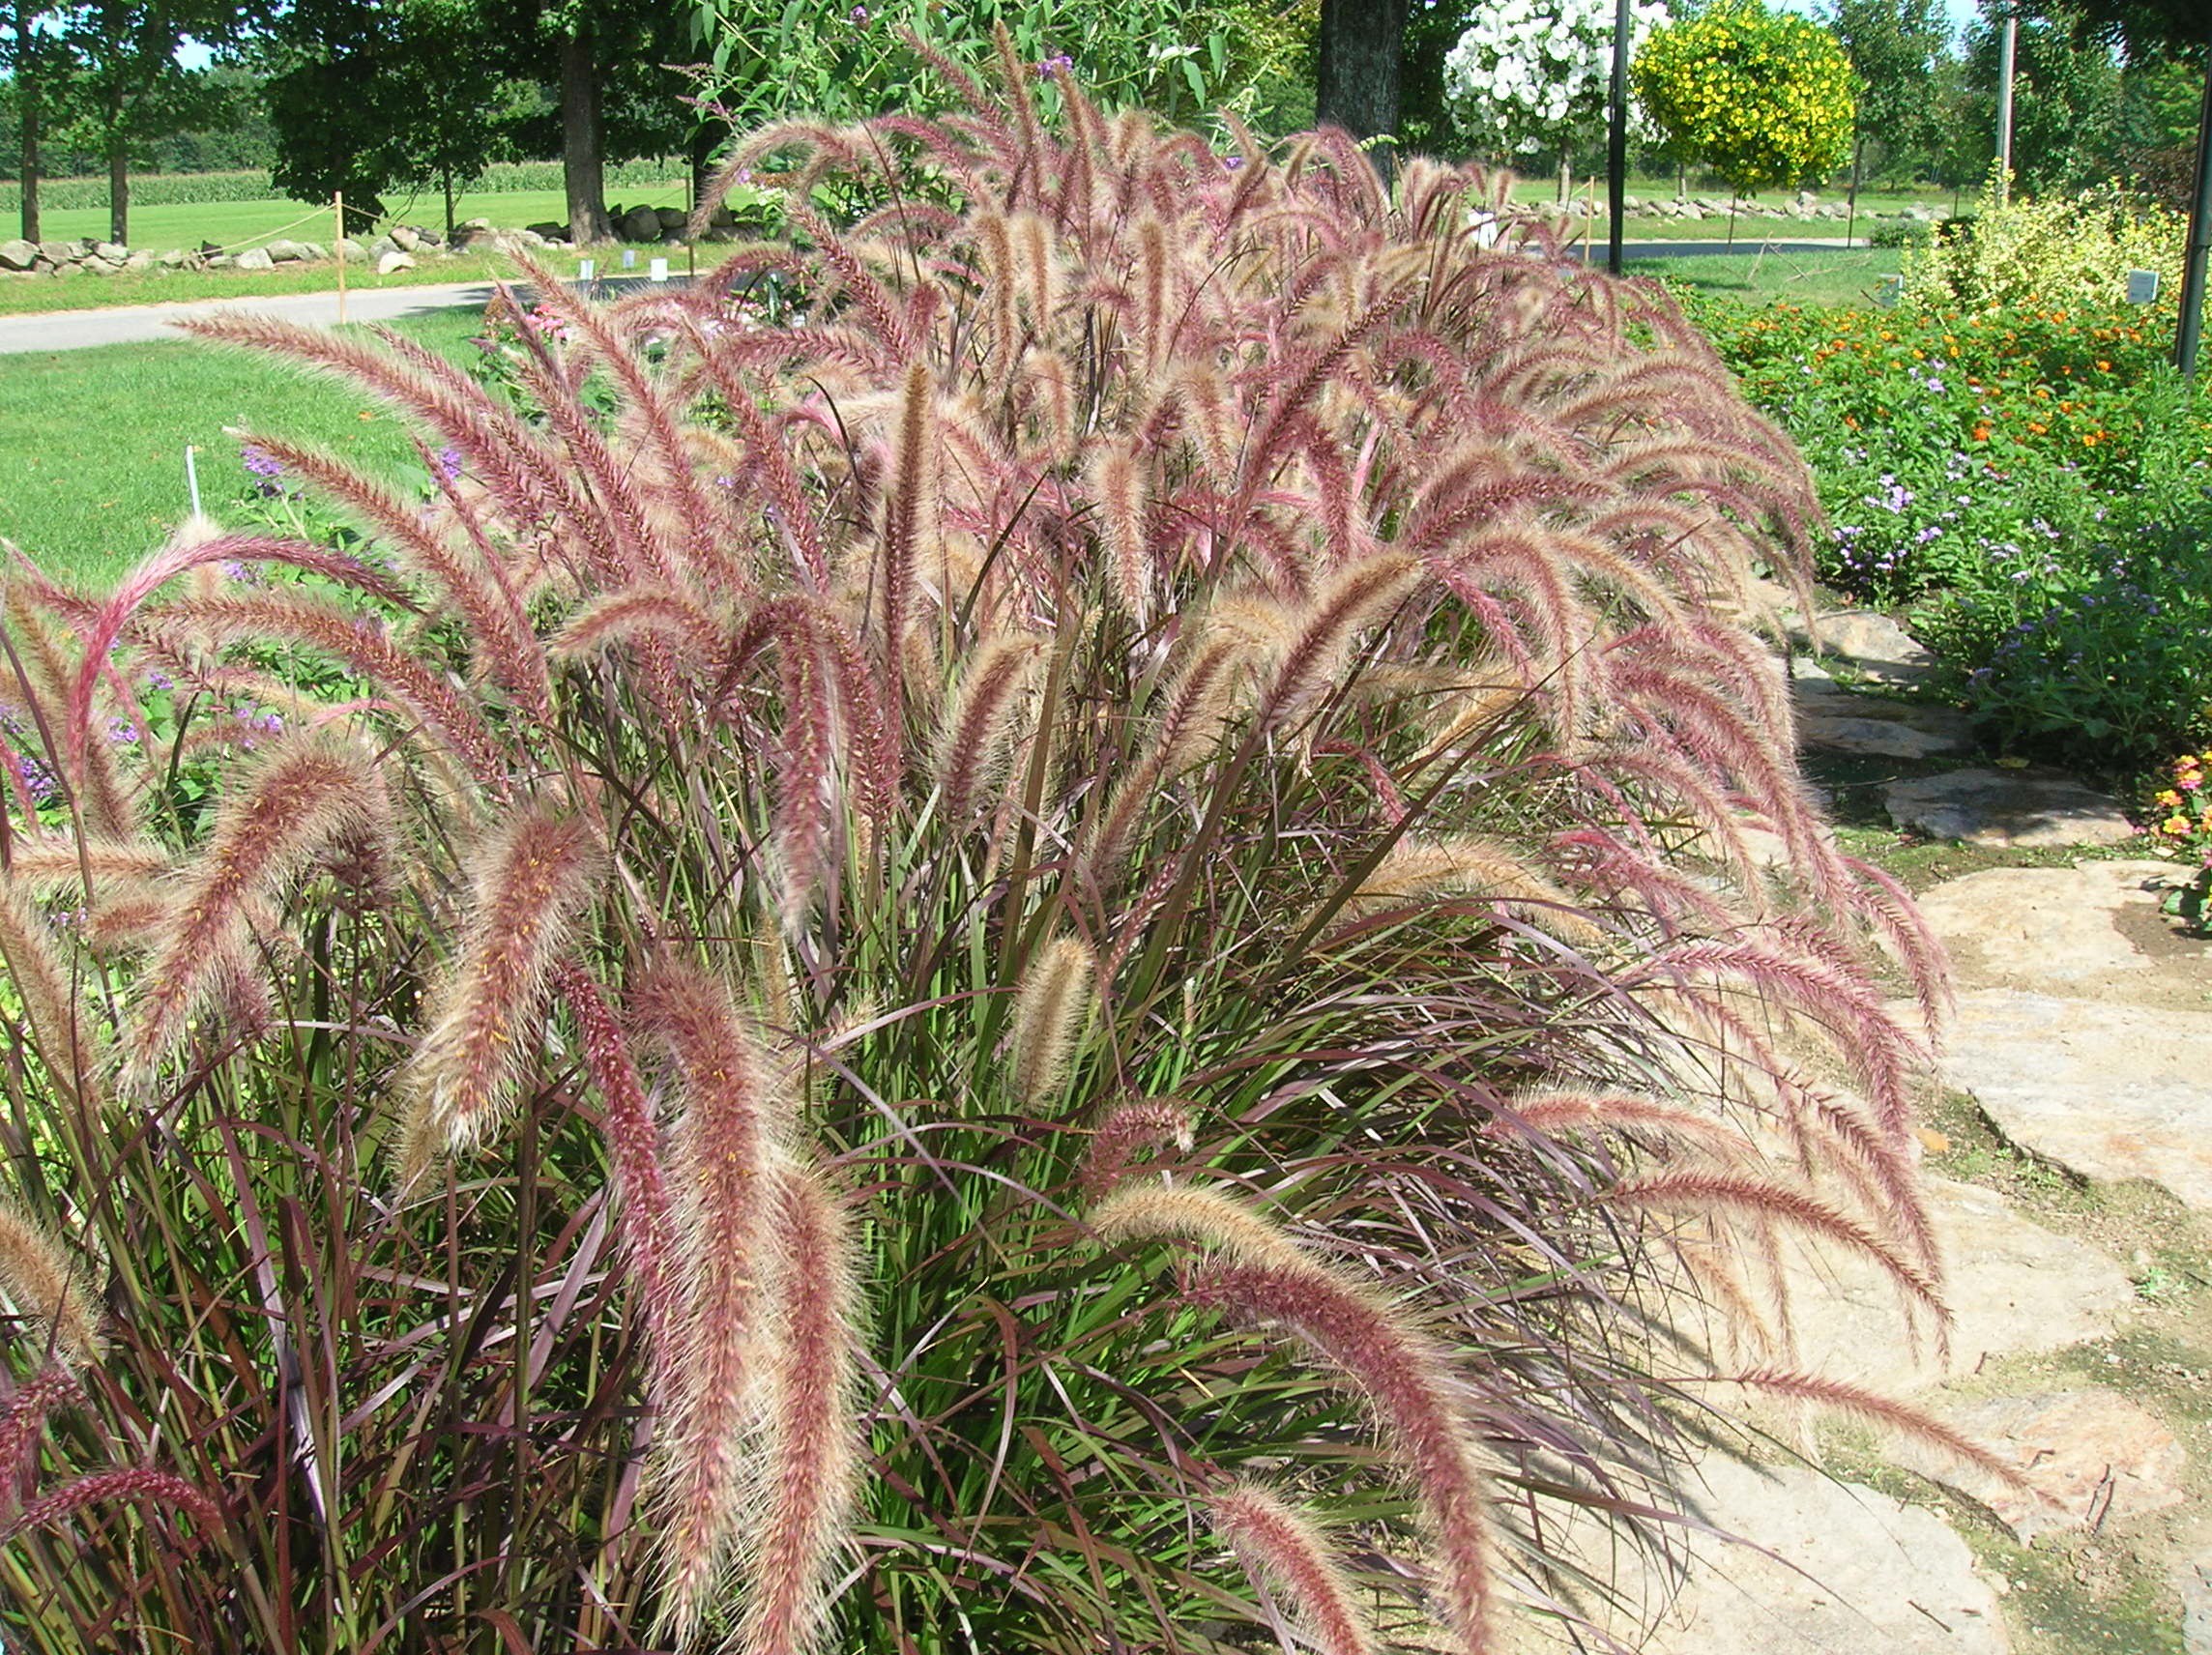 How to Grow: Ornamental Grasses- Growing, Caring for Ornamental Grass